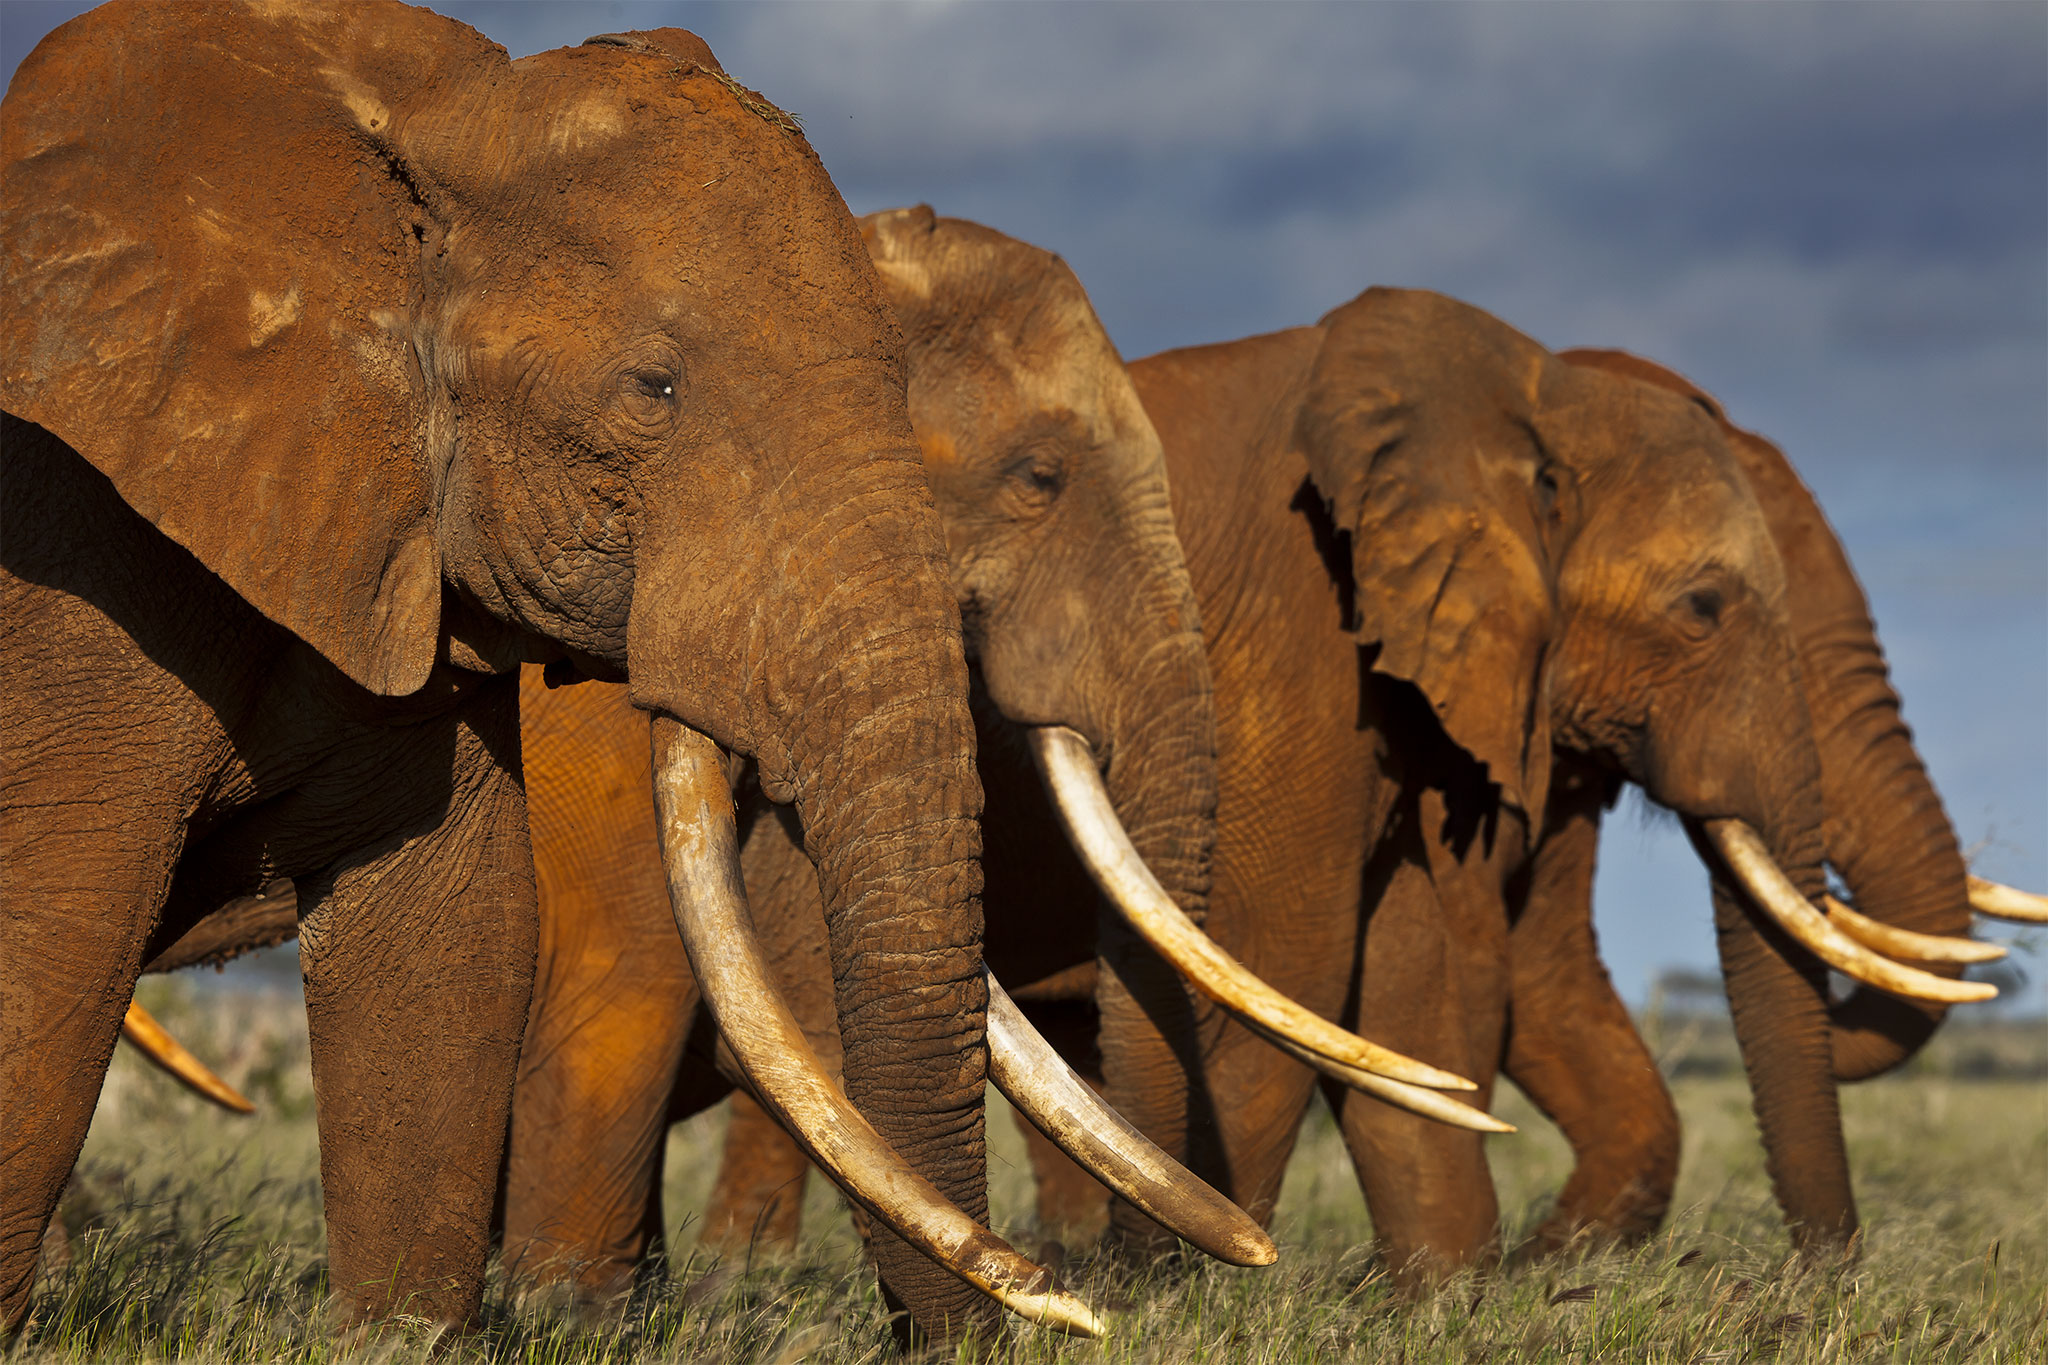 Why Some Countries Don't Want to Do More to Protect Elephants